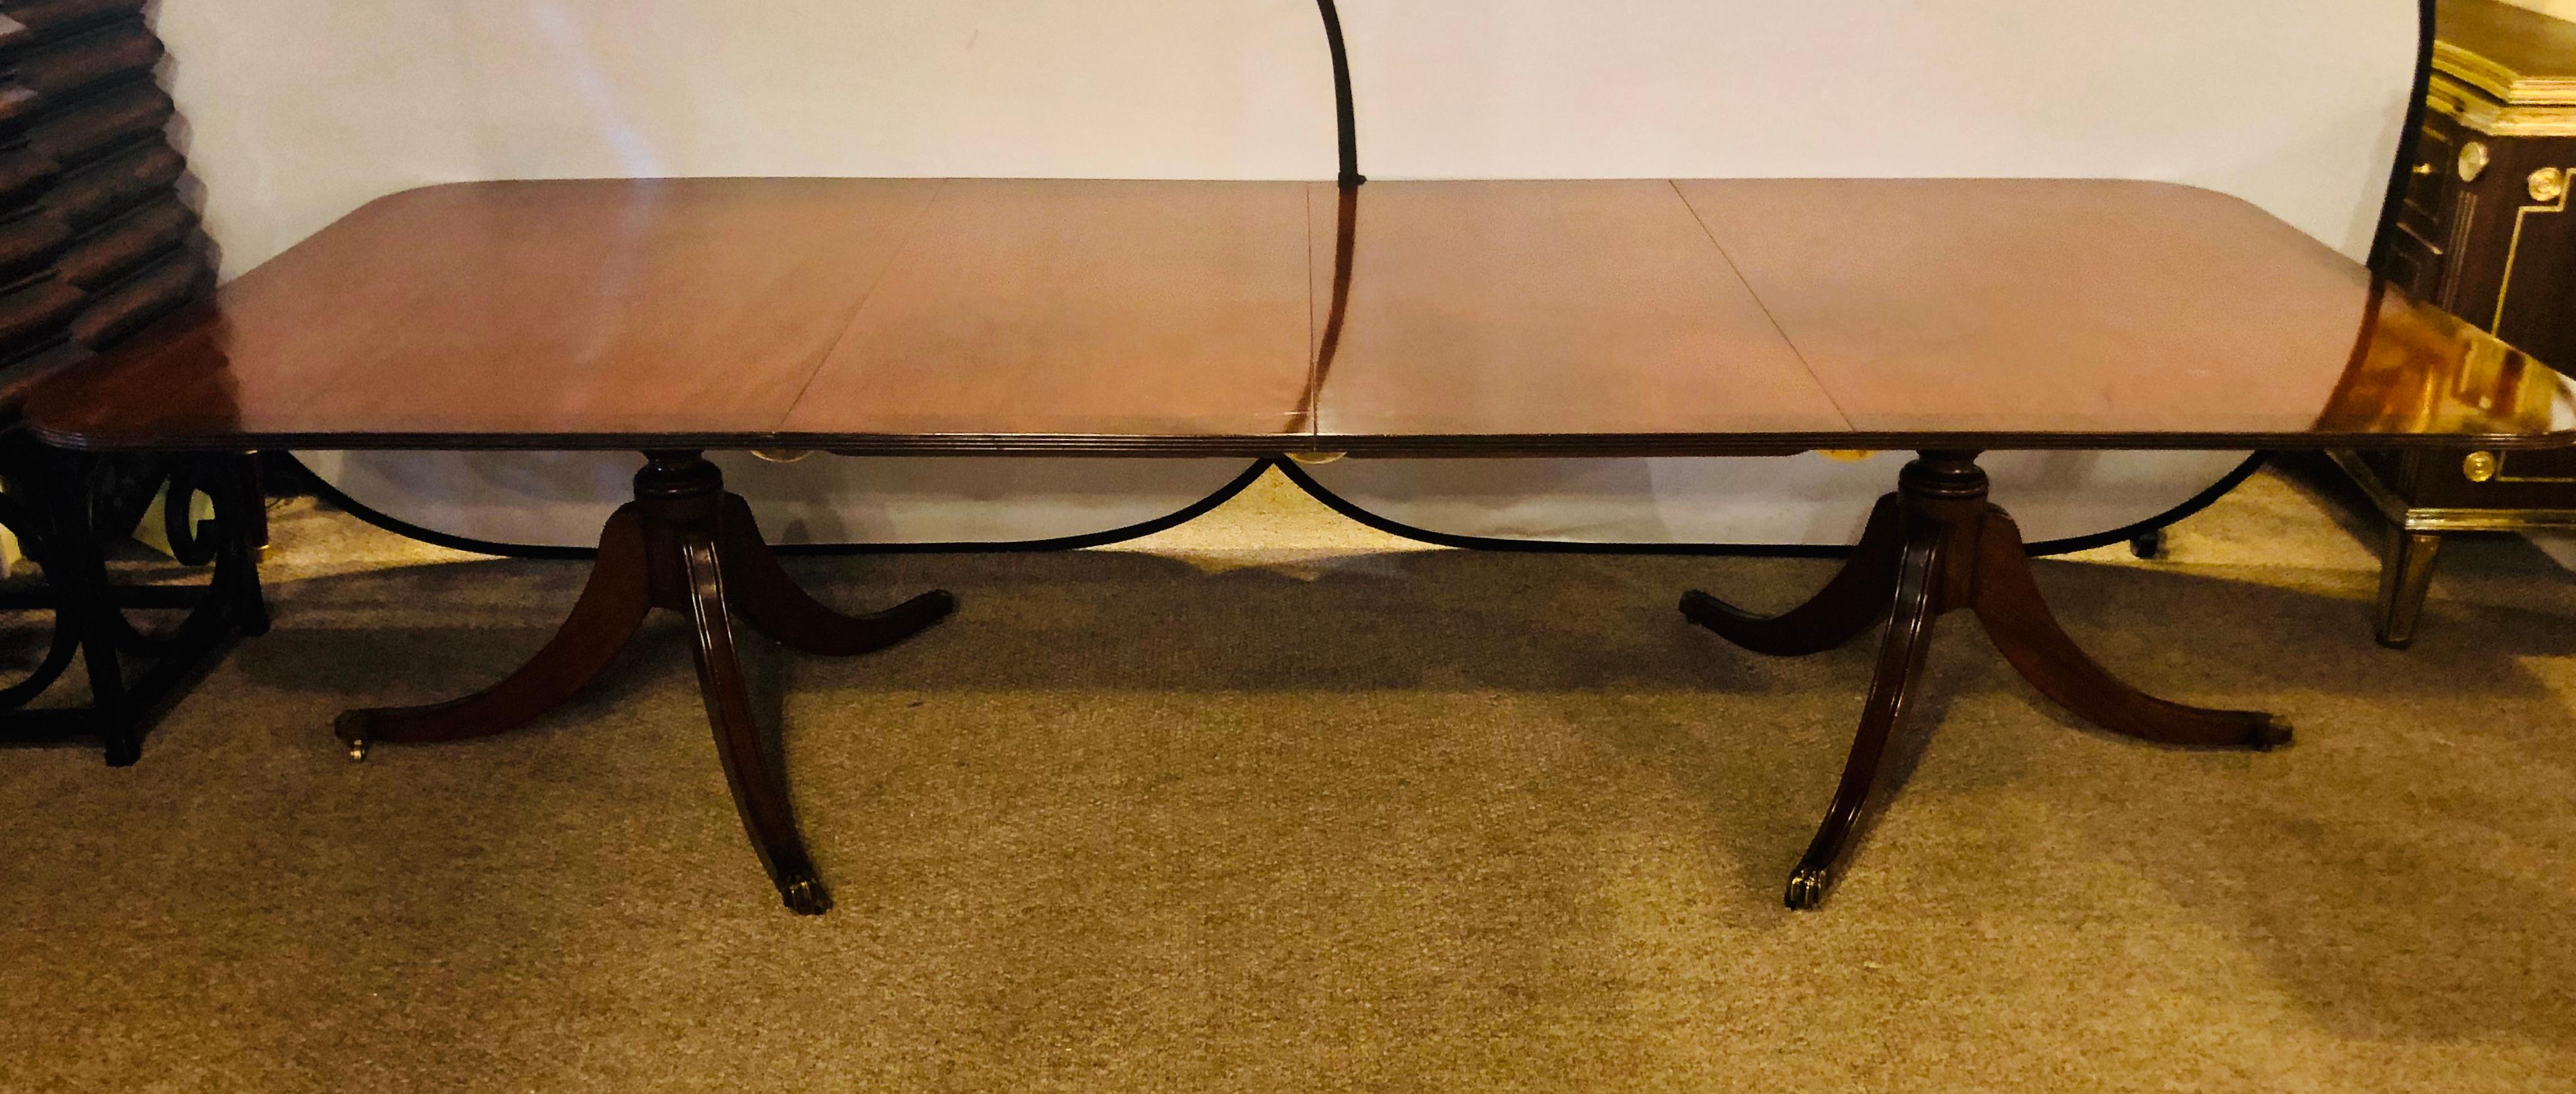 Early 20th century Georgian style banded mahogany dining table. This finely constructed dining table sits upon a tripod base double pedestal having claw brass sabots. The table has two leaves and is stationary as it will does not open and close to